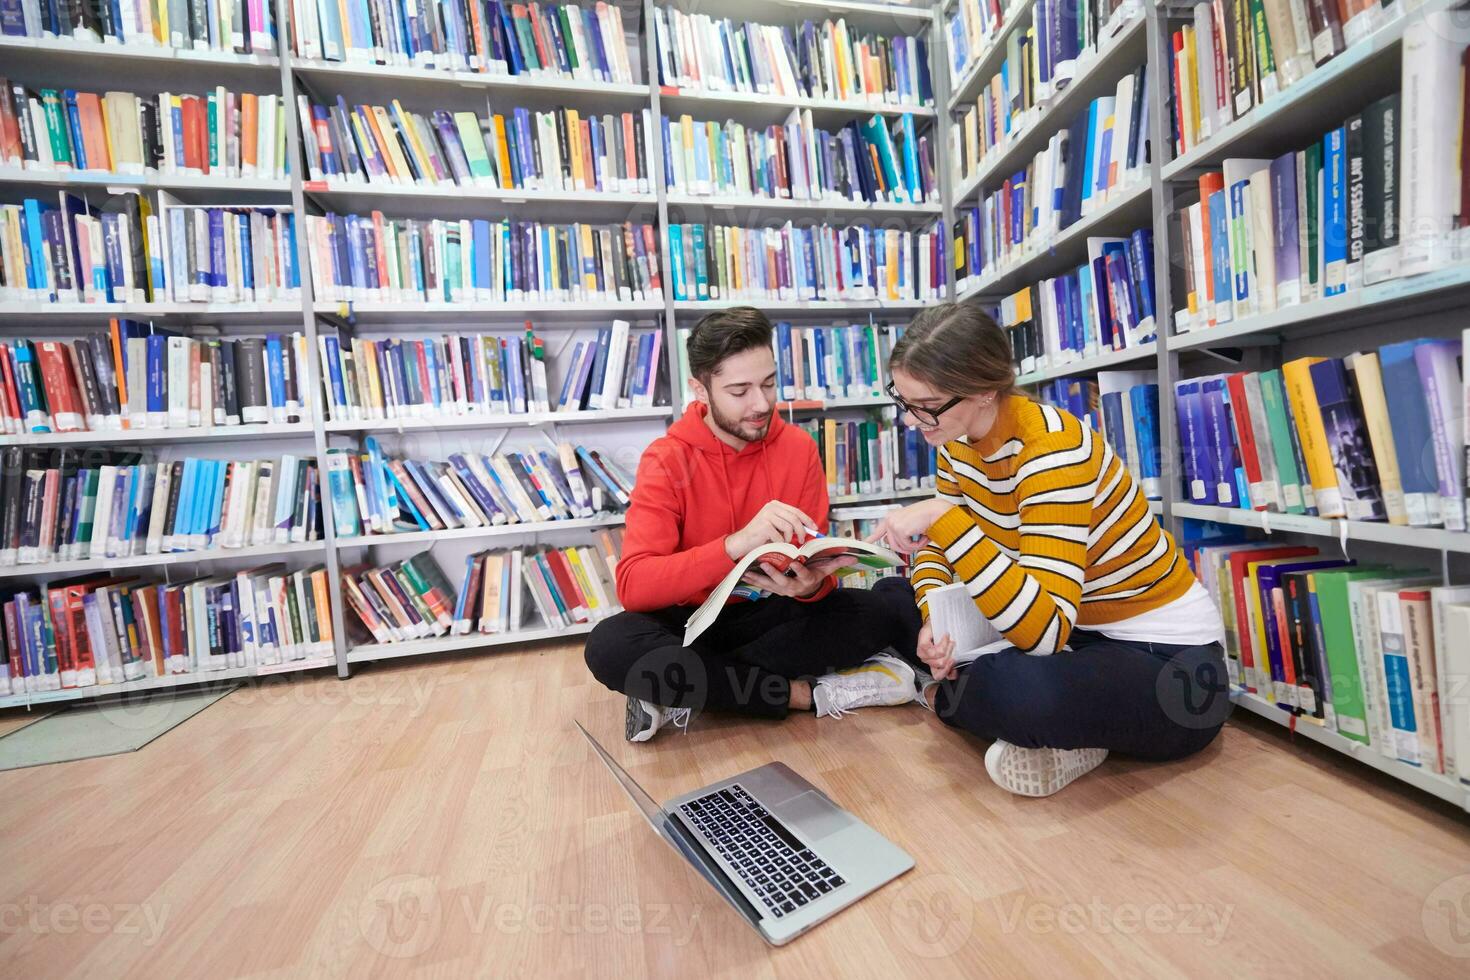 the students uses a notebook, laptop and a school library photo